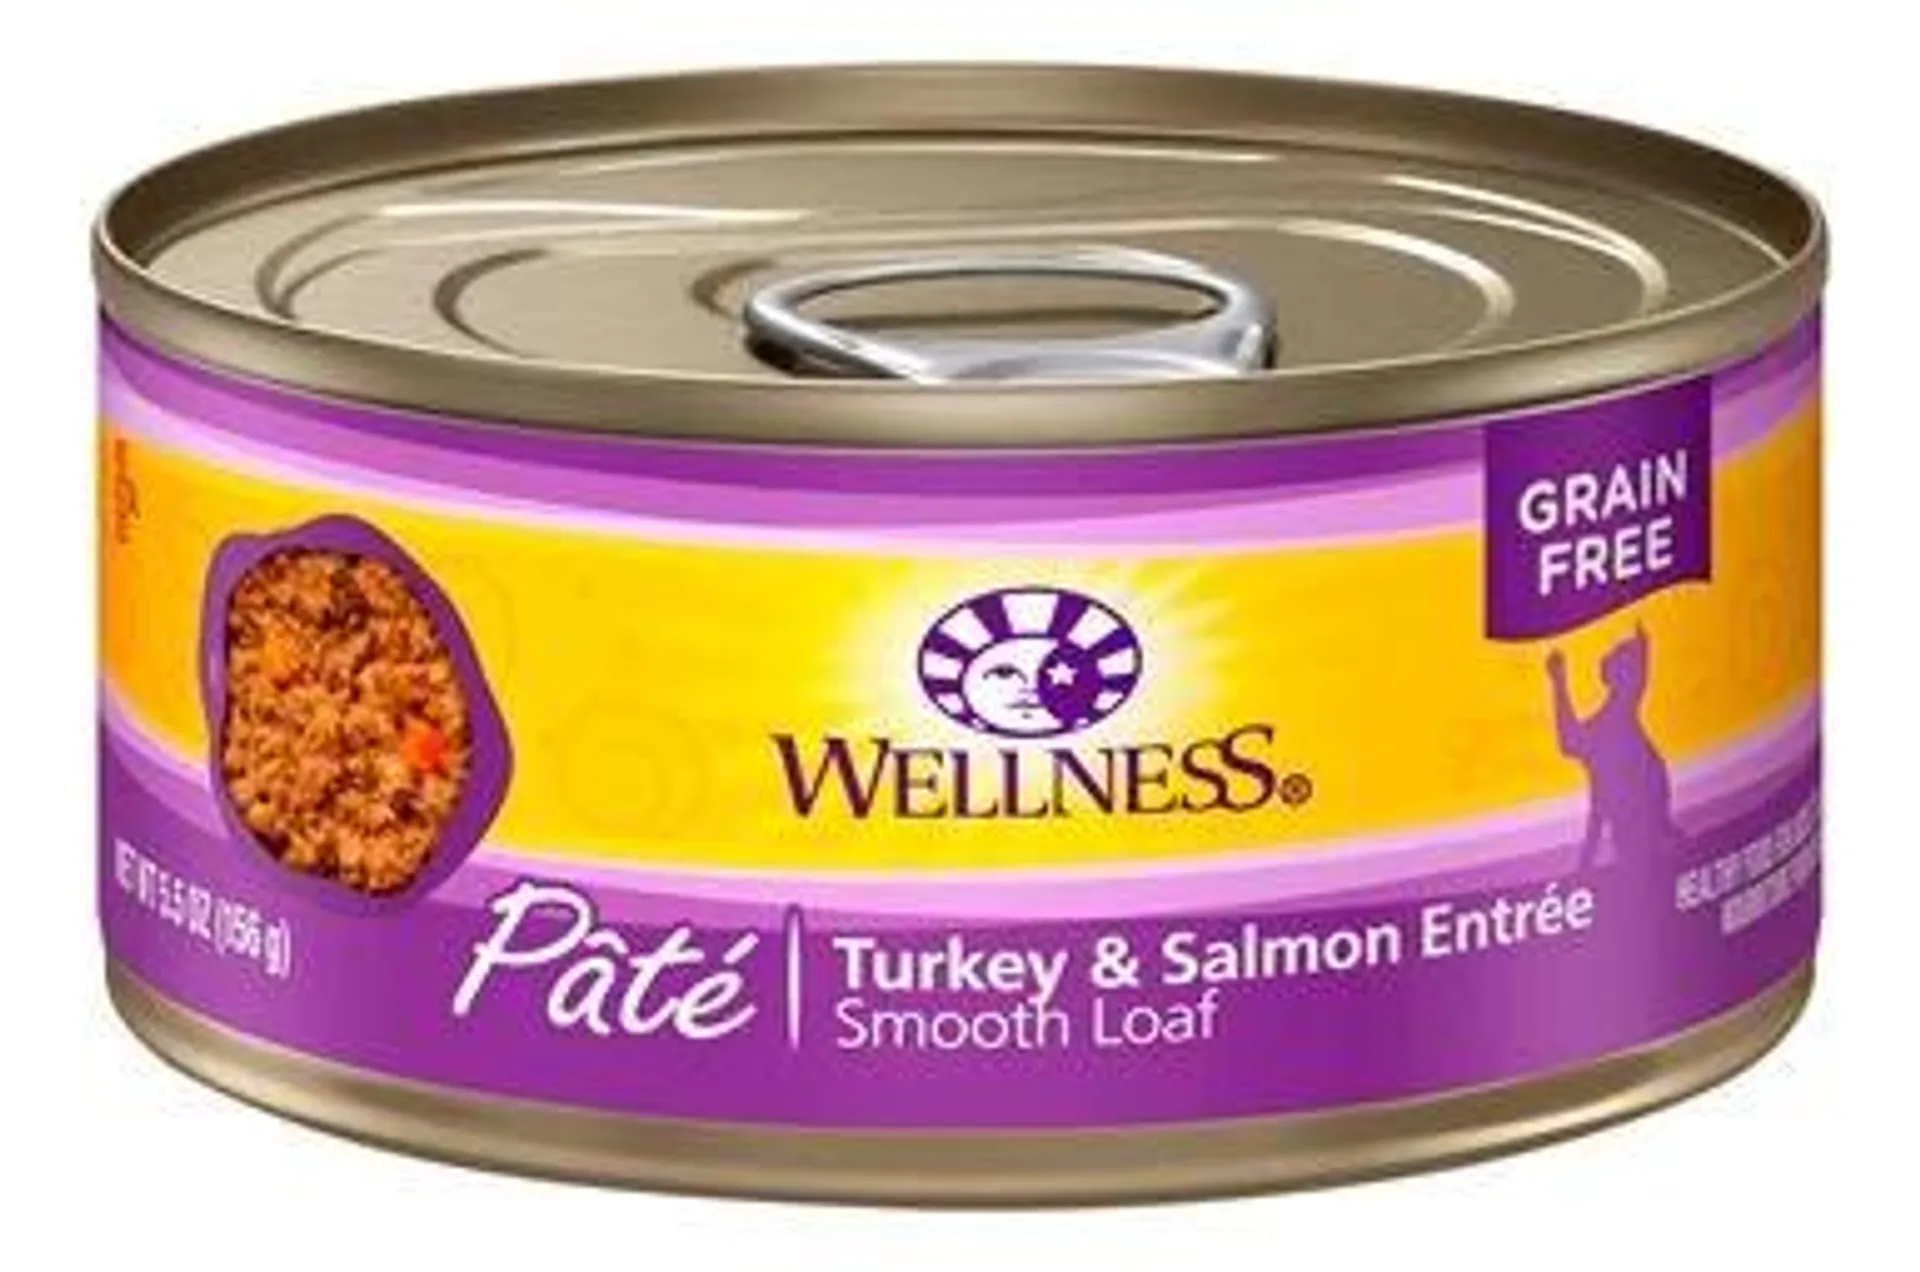 Wellness Complete Health Grain Free Canned Cat Food, Turkey & Salmon Pate, 5.5 Ounces